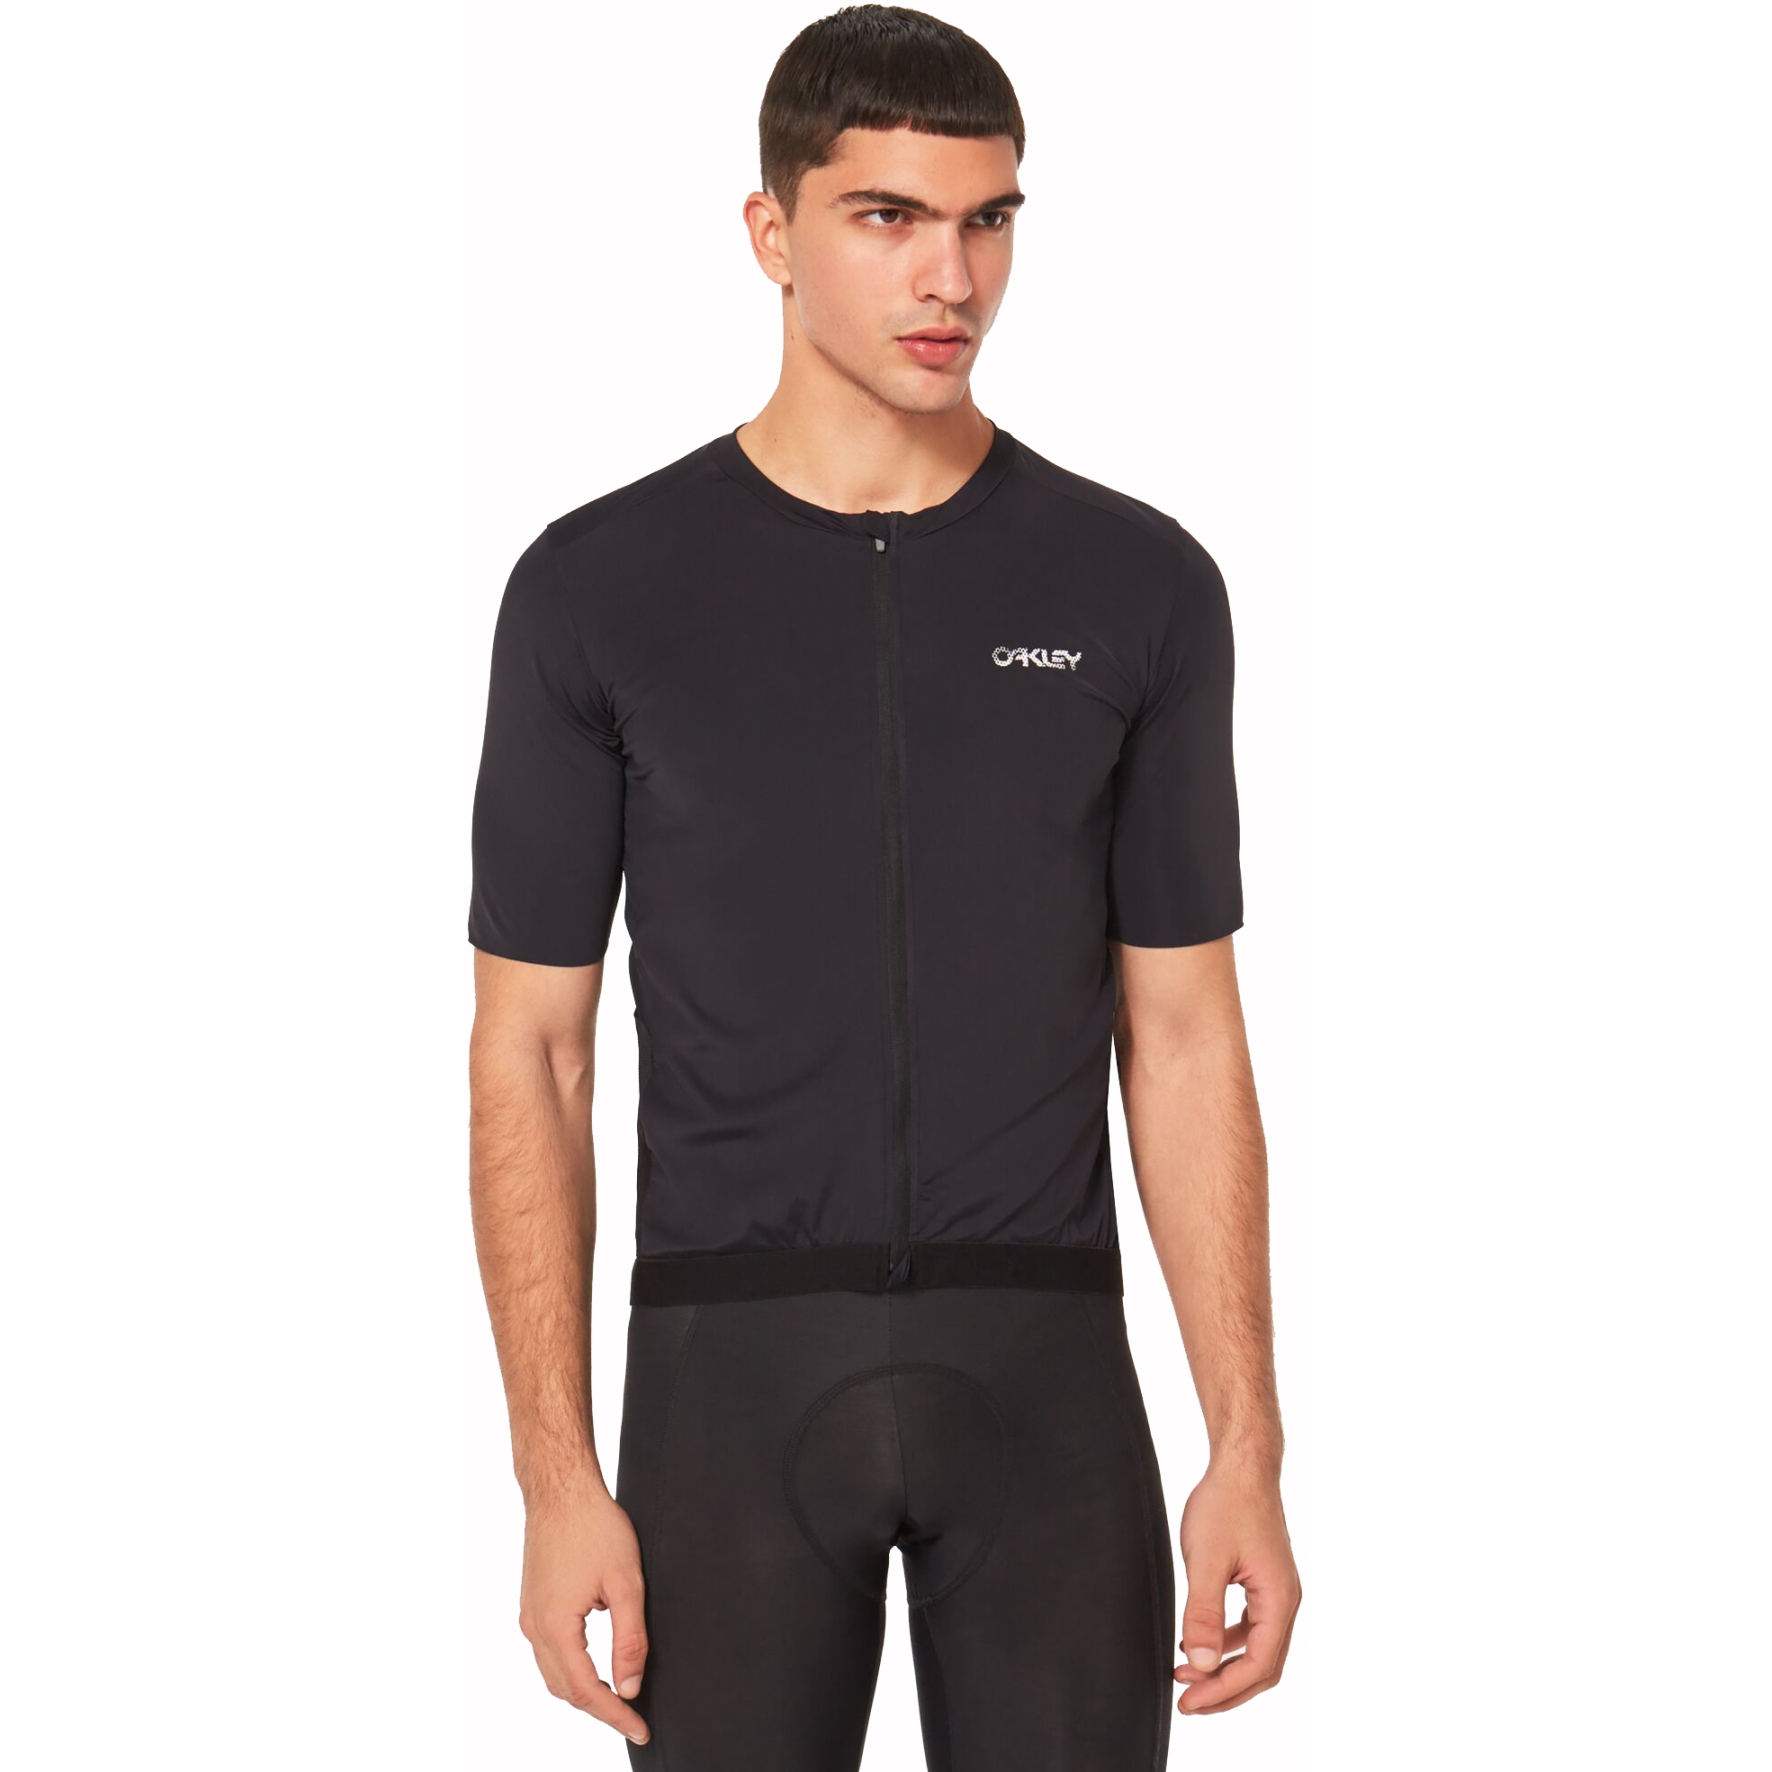 Productfoto van Oakley Point To Point Shirt Heren - Blackout